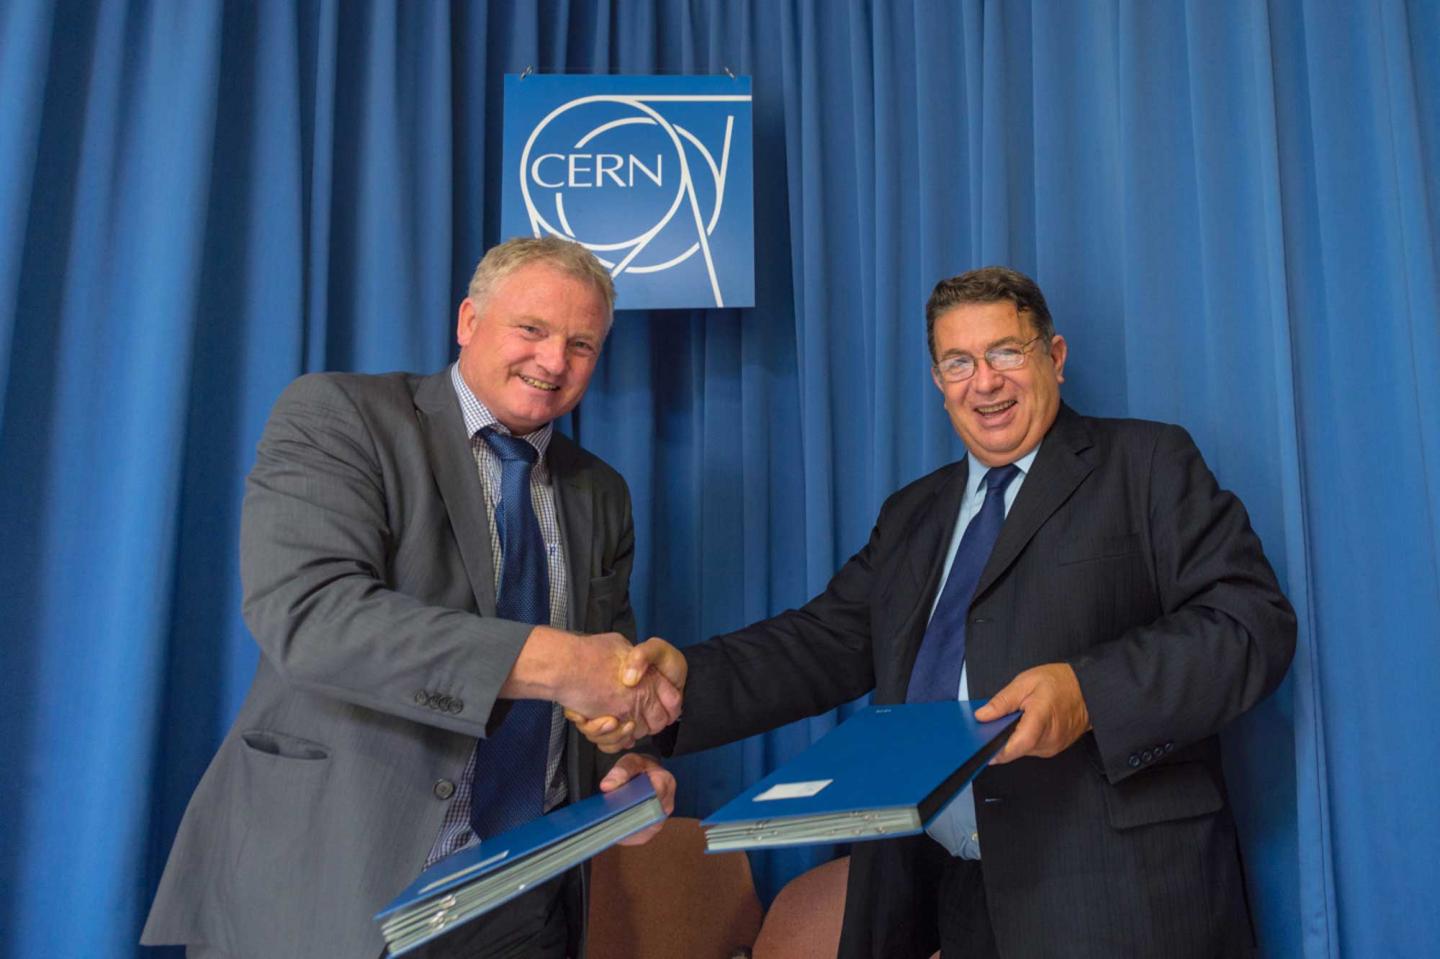 Business Incubation Centre of CERN tech opens in Norway